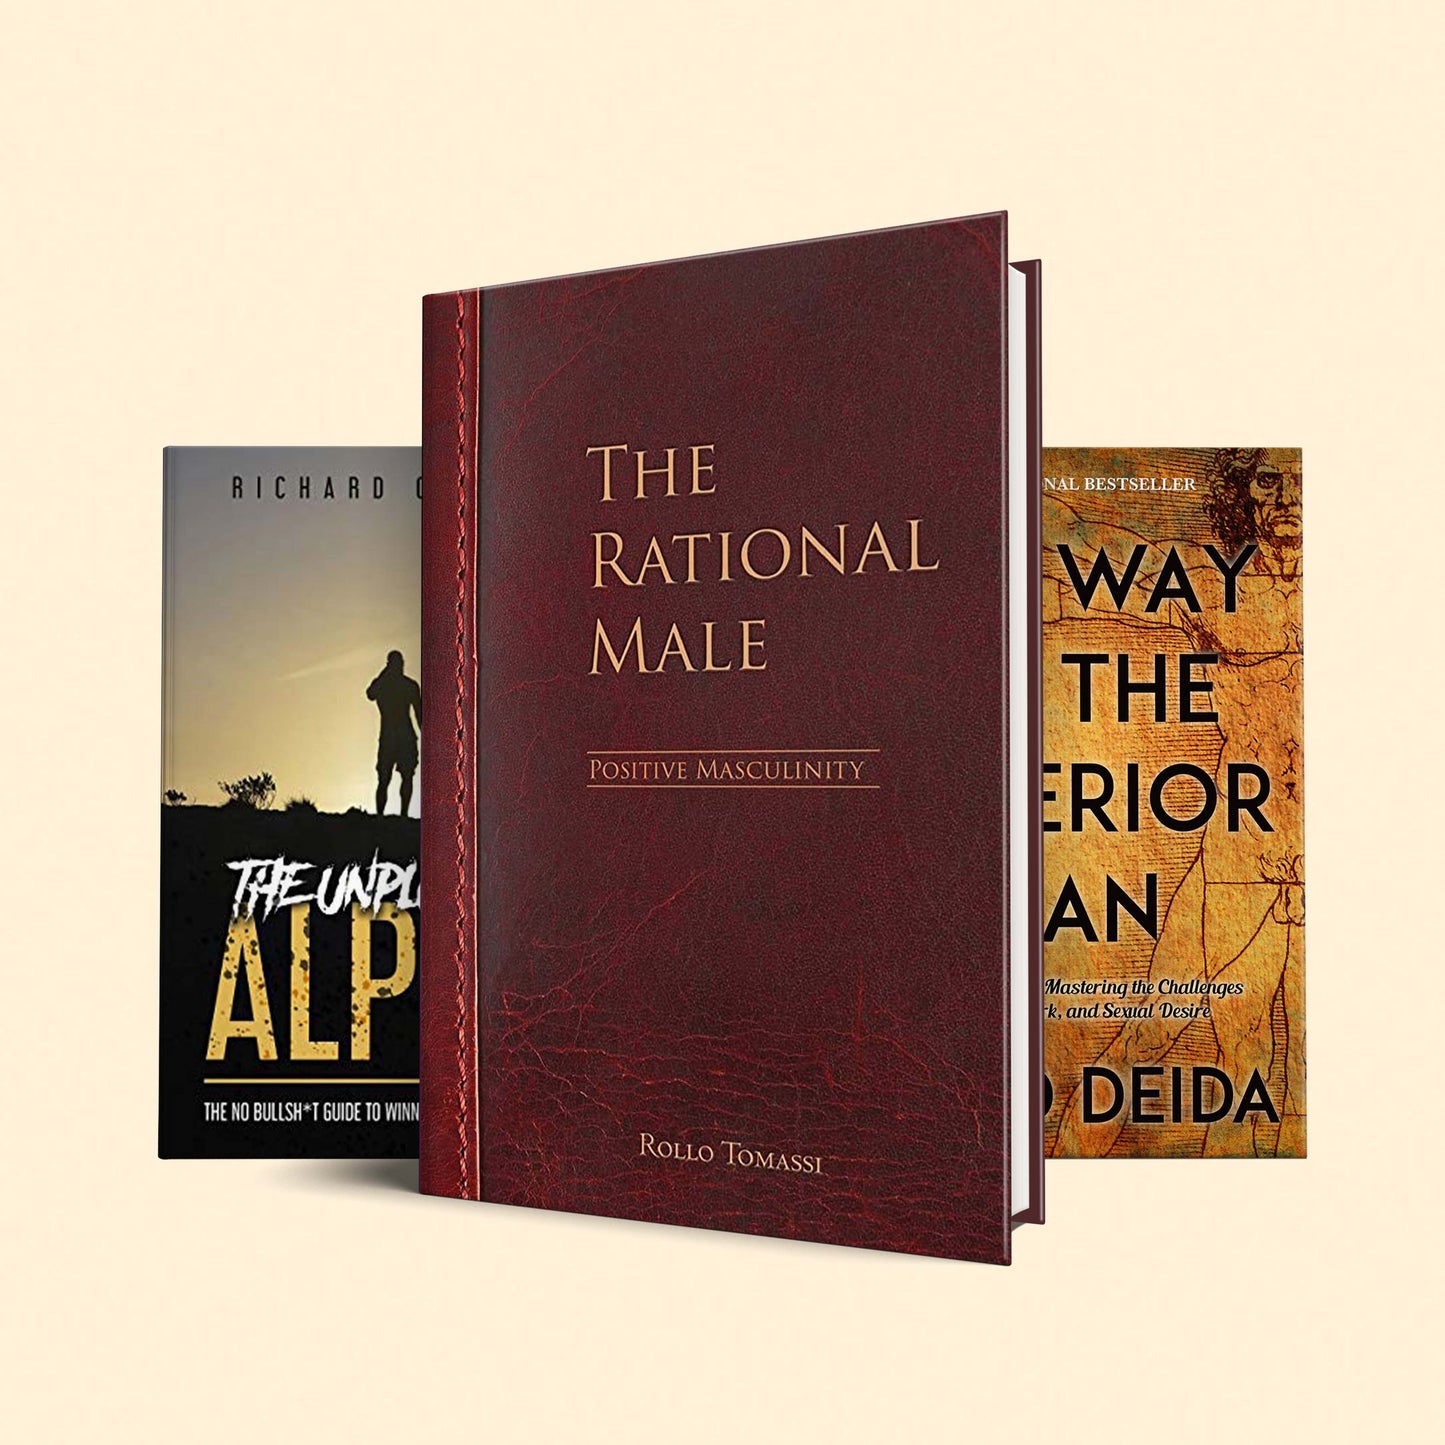 3 books to become the man! : The Rational Male :Positive Masculinity,  the way of superior man, The Unplugged Alpha